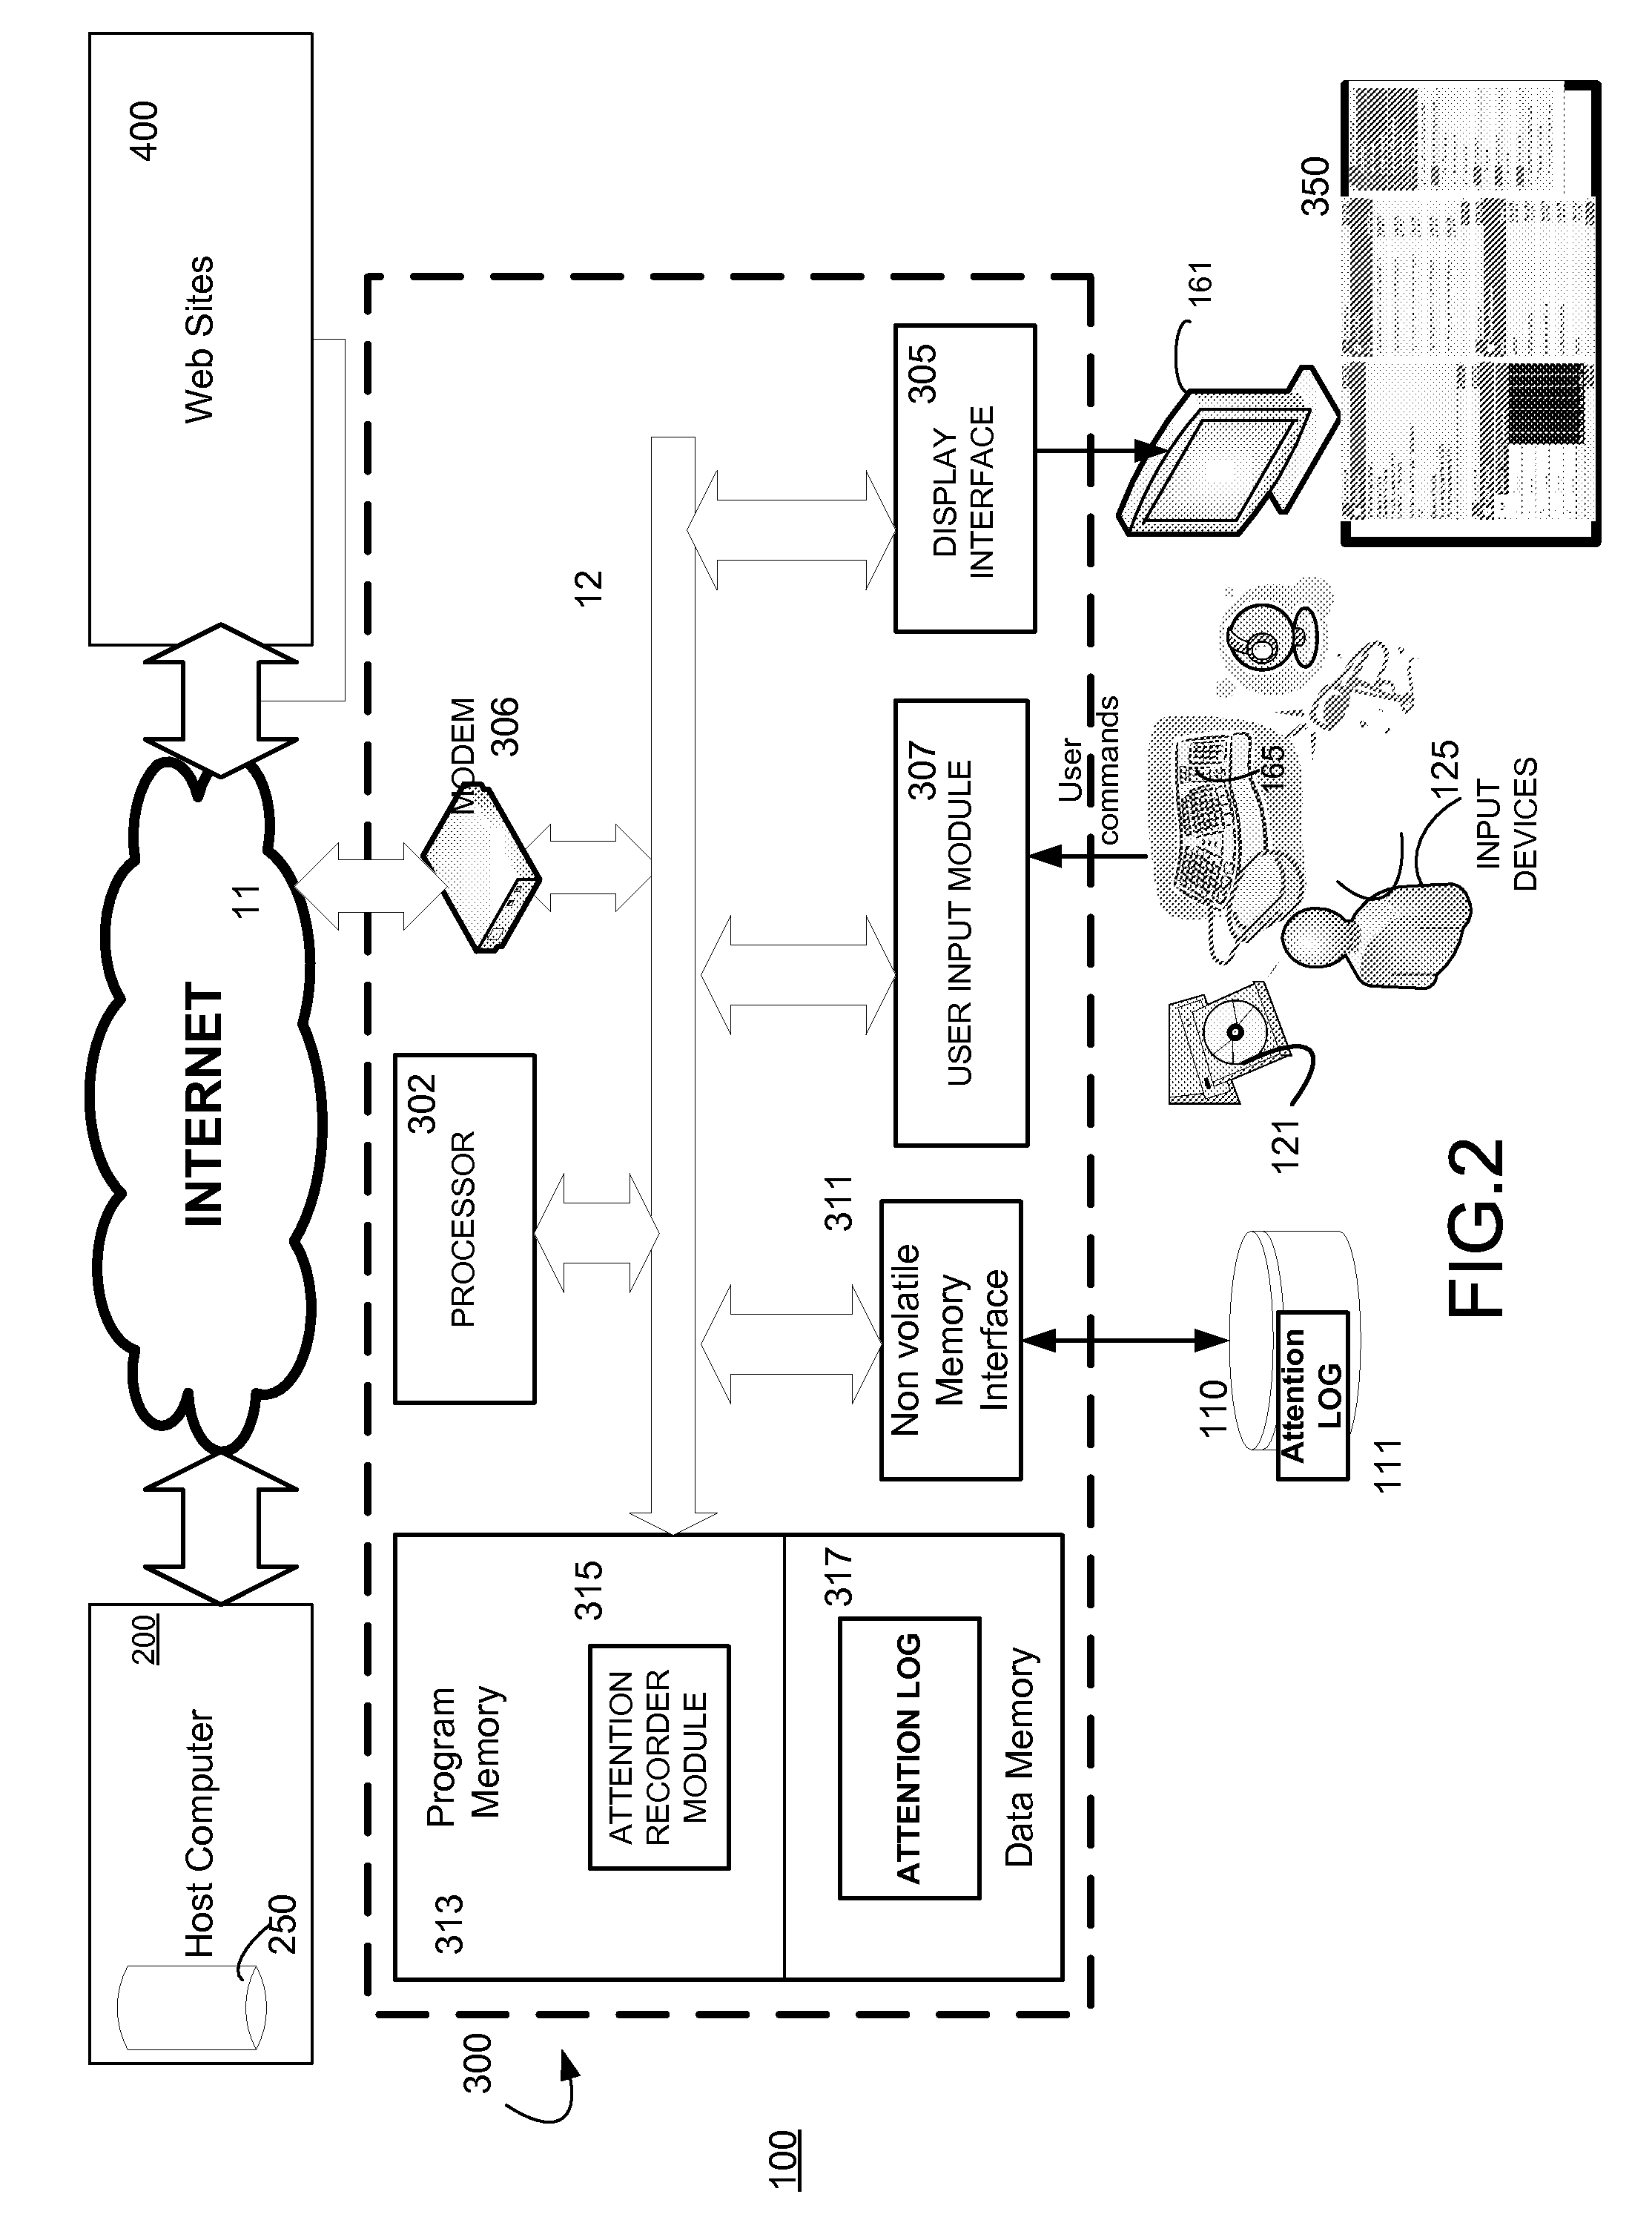 Methods and Systems for Storing, Processing and Managing User Click-Stream Data